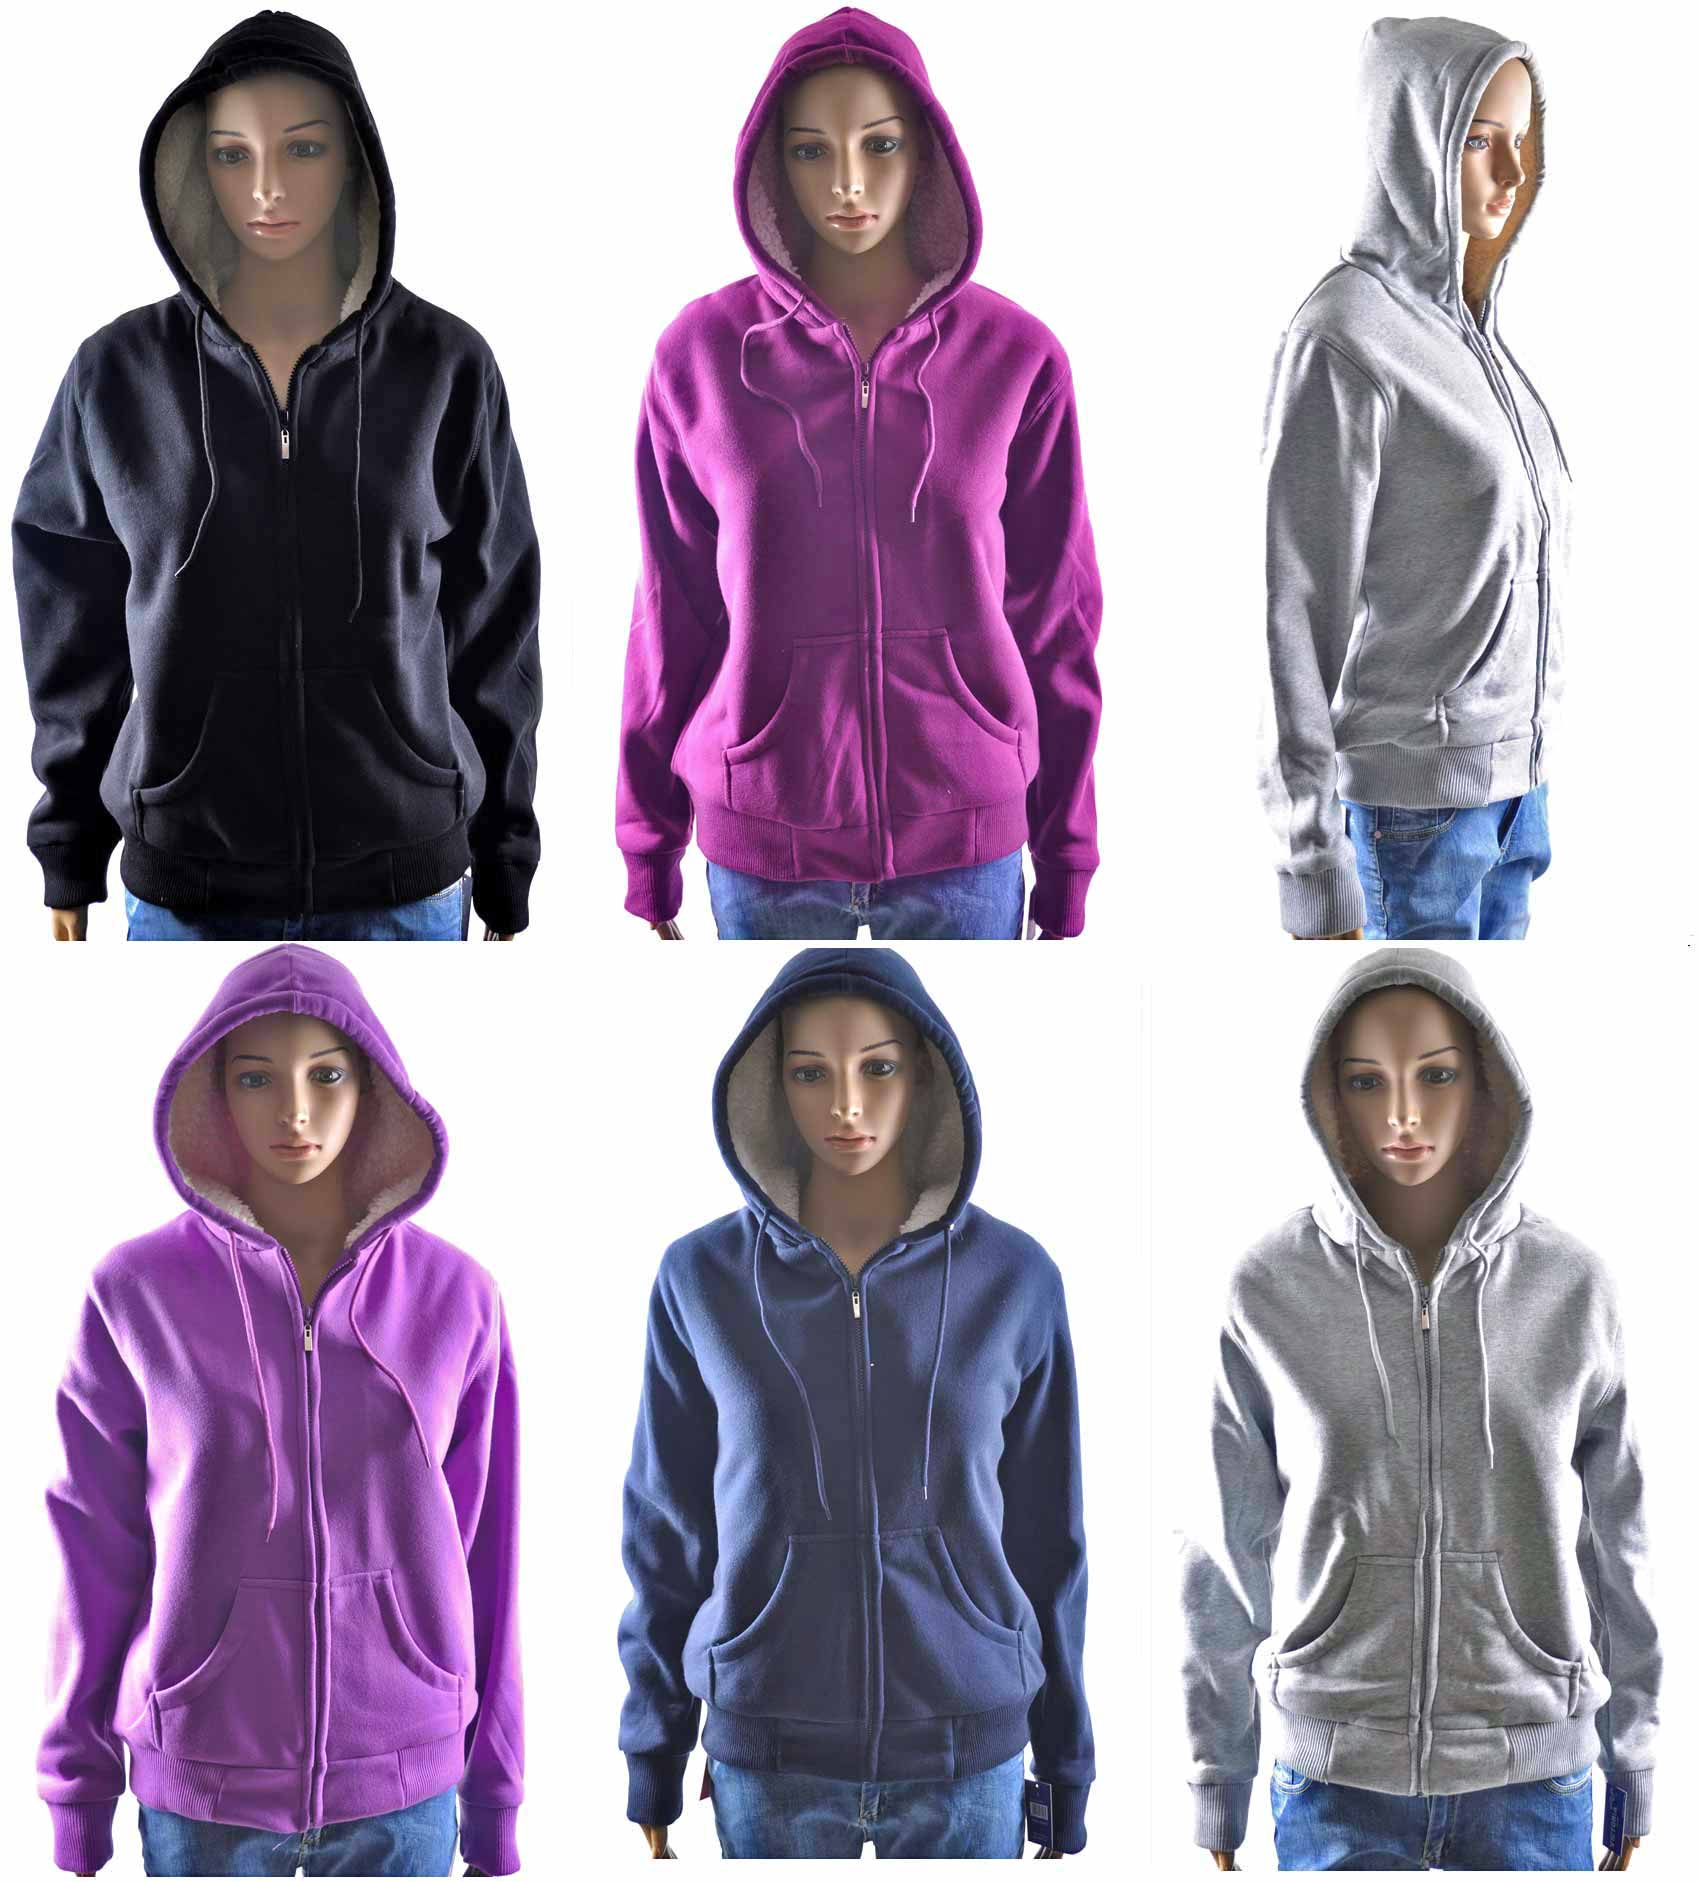 Women's HOODIES w/ Sherpa Lining - Solid Colors - Sizes S-XL or M-2XL